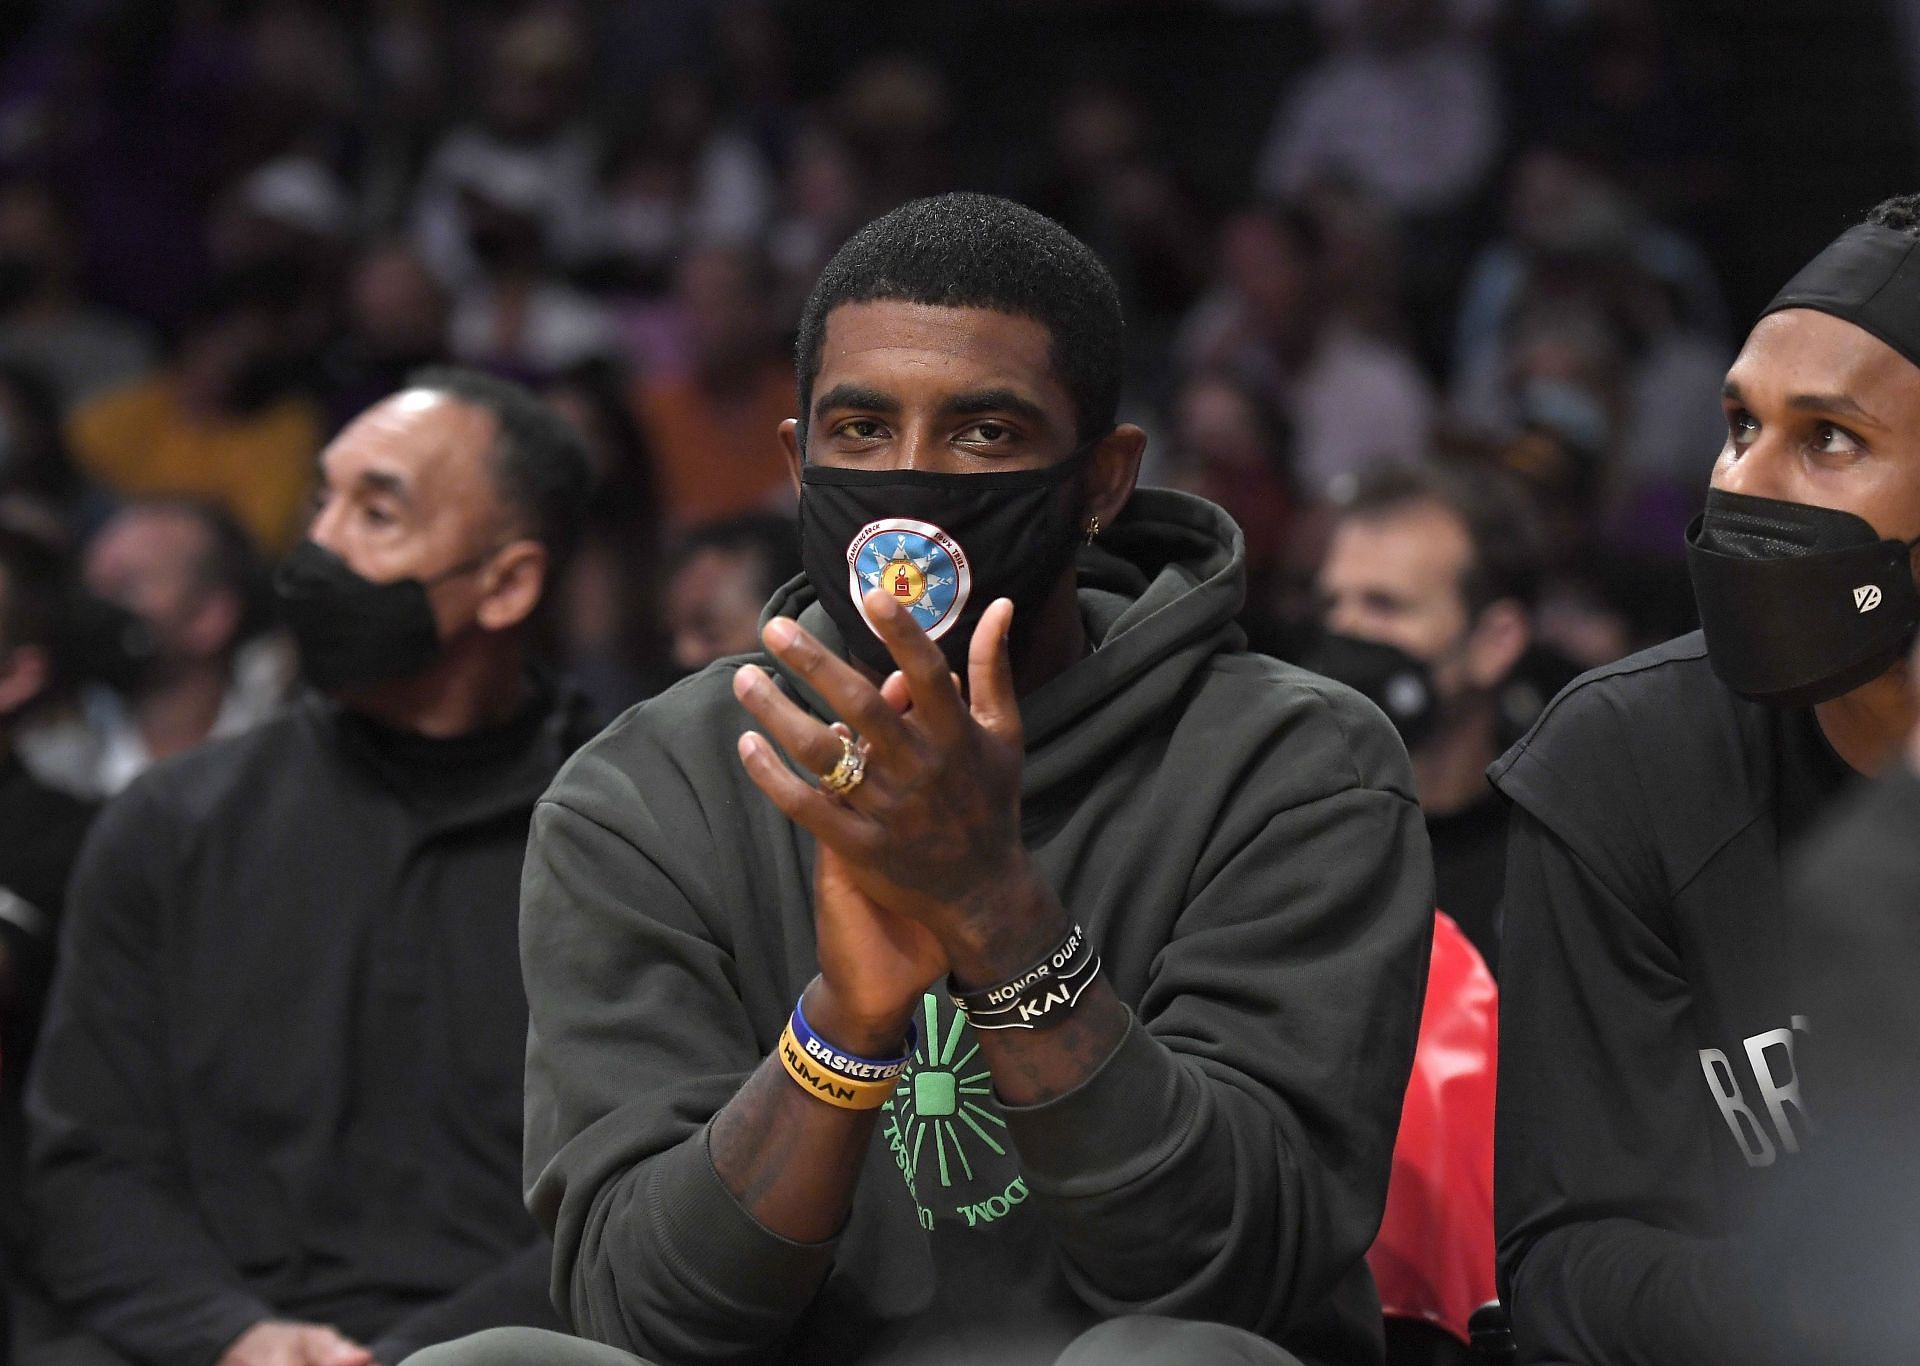 Kyrie Irving may be available to play for Brooklyn when they visit Portland on December 23